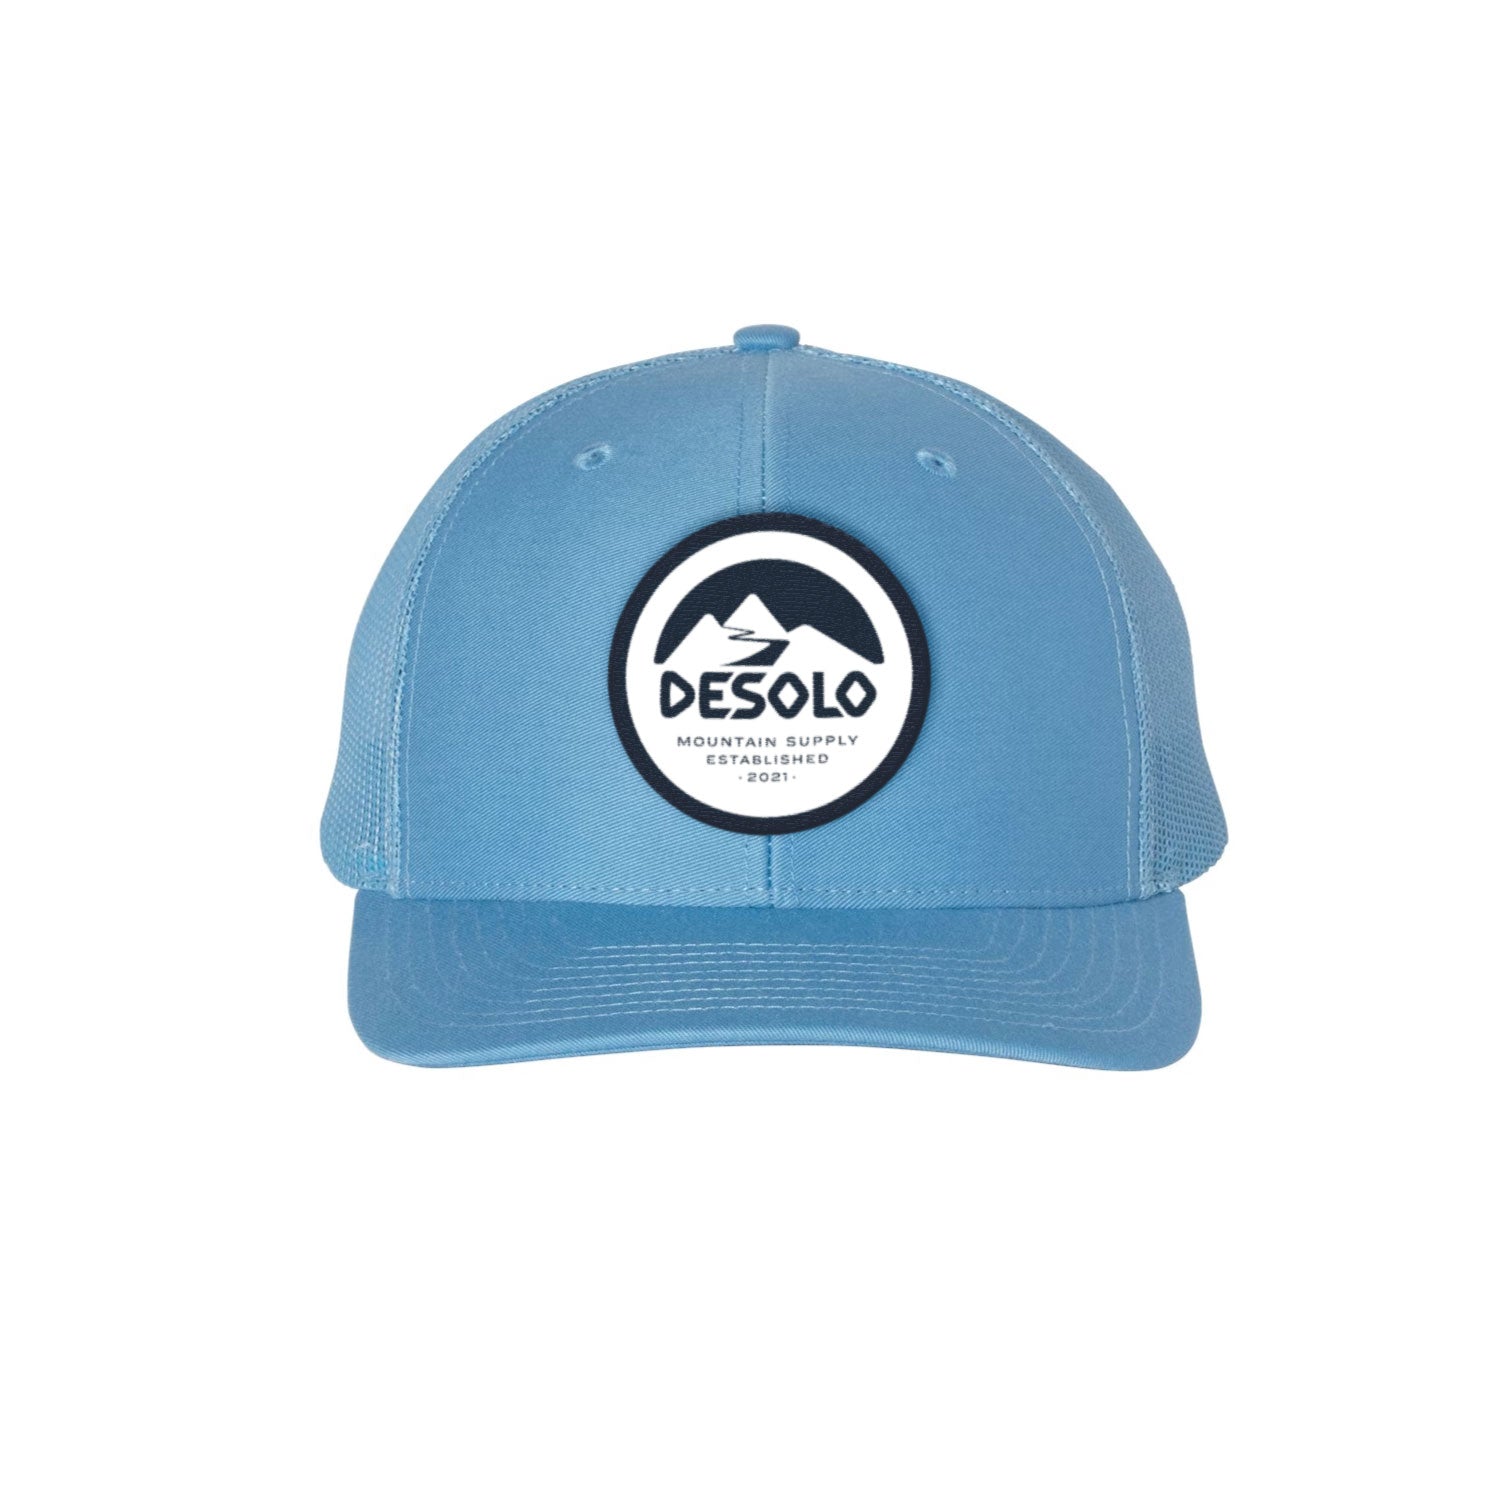 Mt. Official Hat (Trucker Style) - Columbia Blue – Desolo